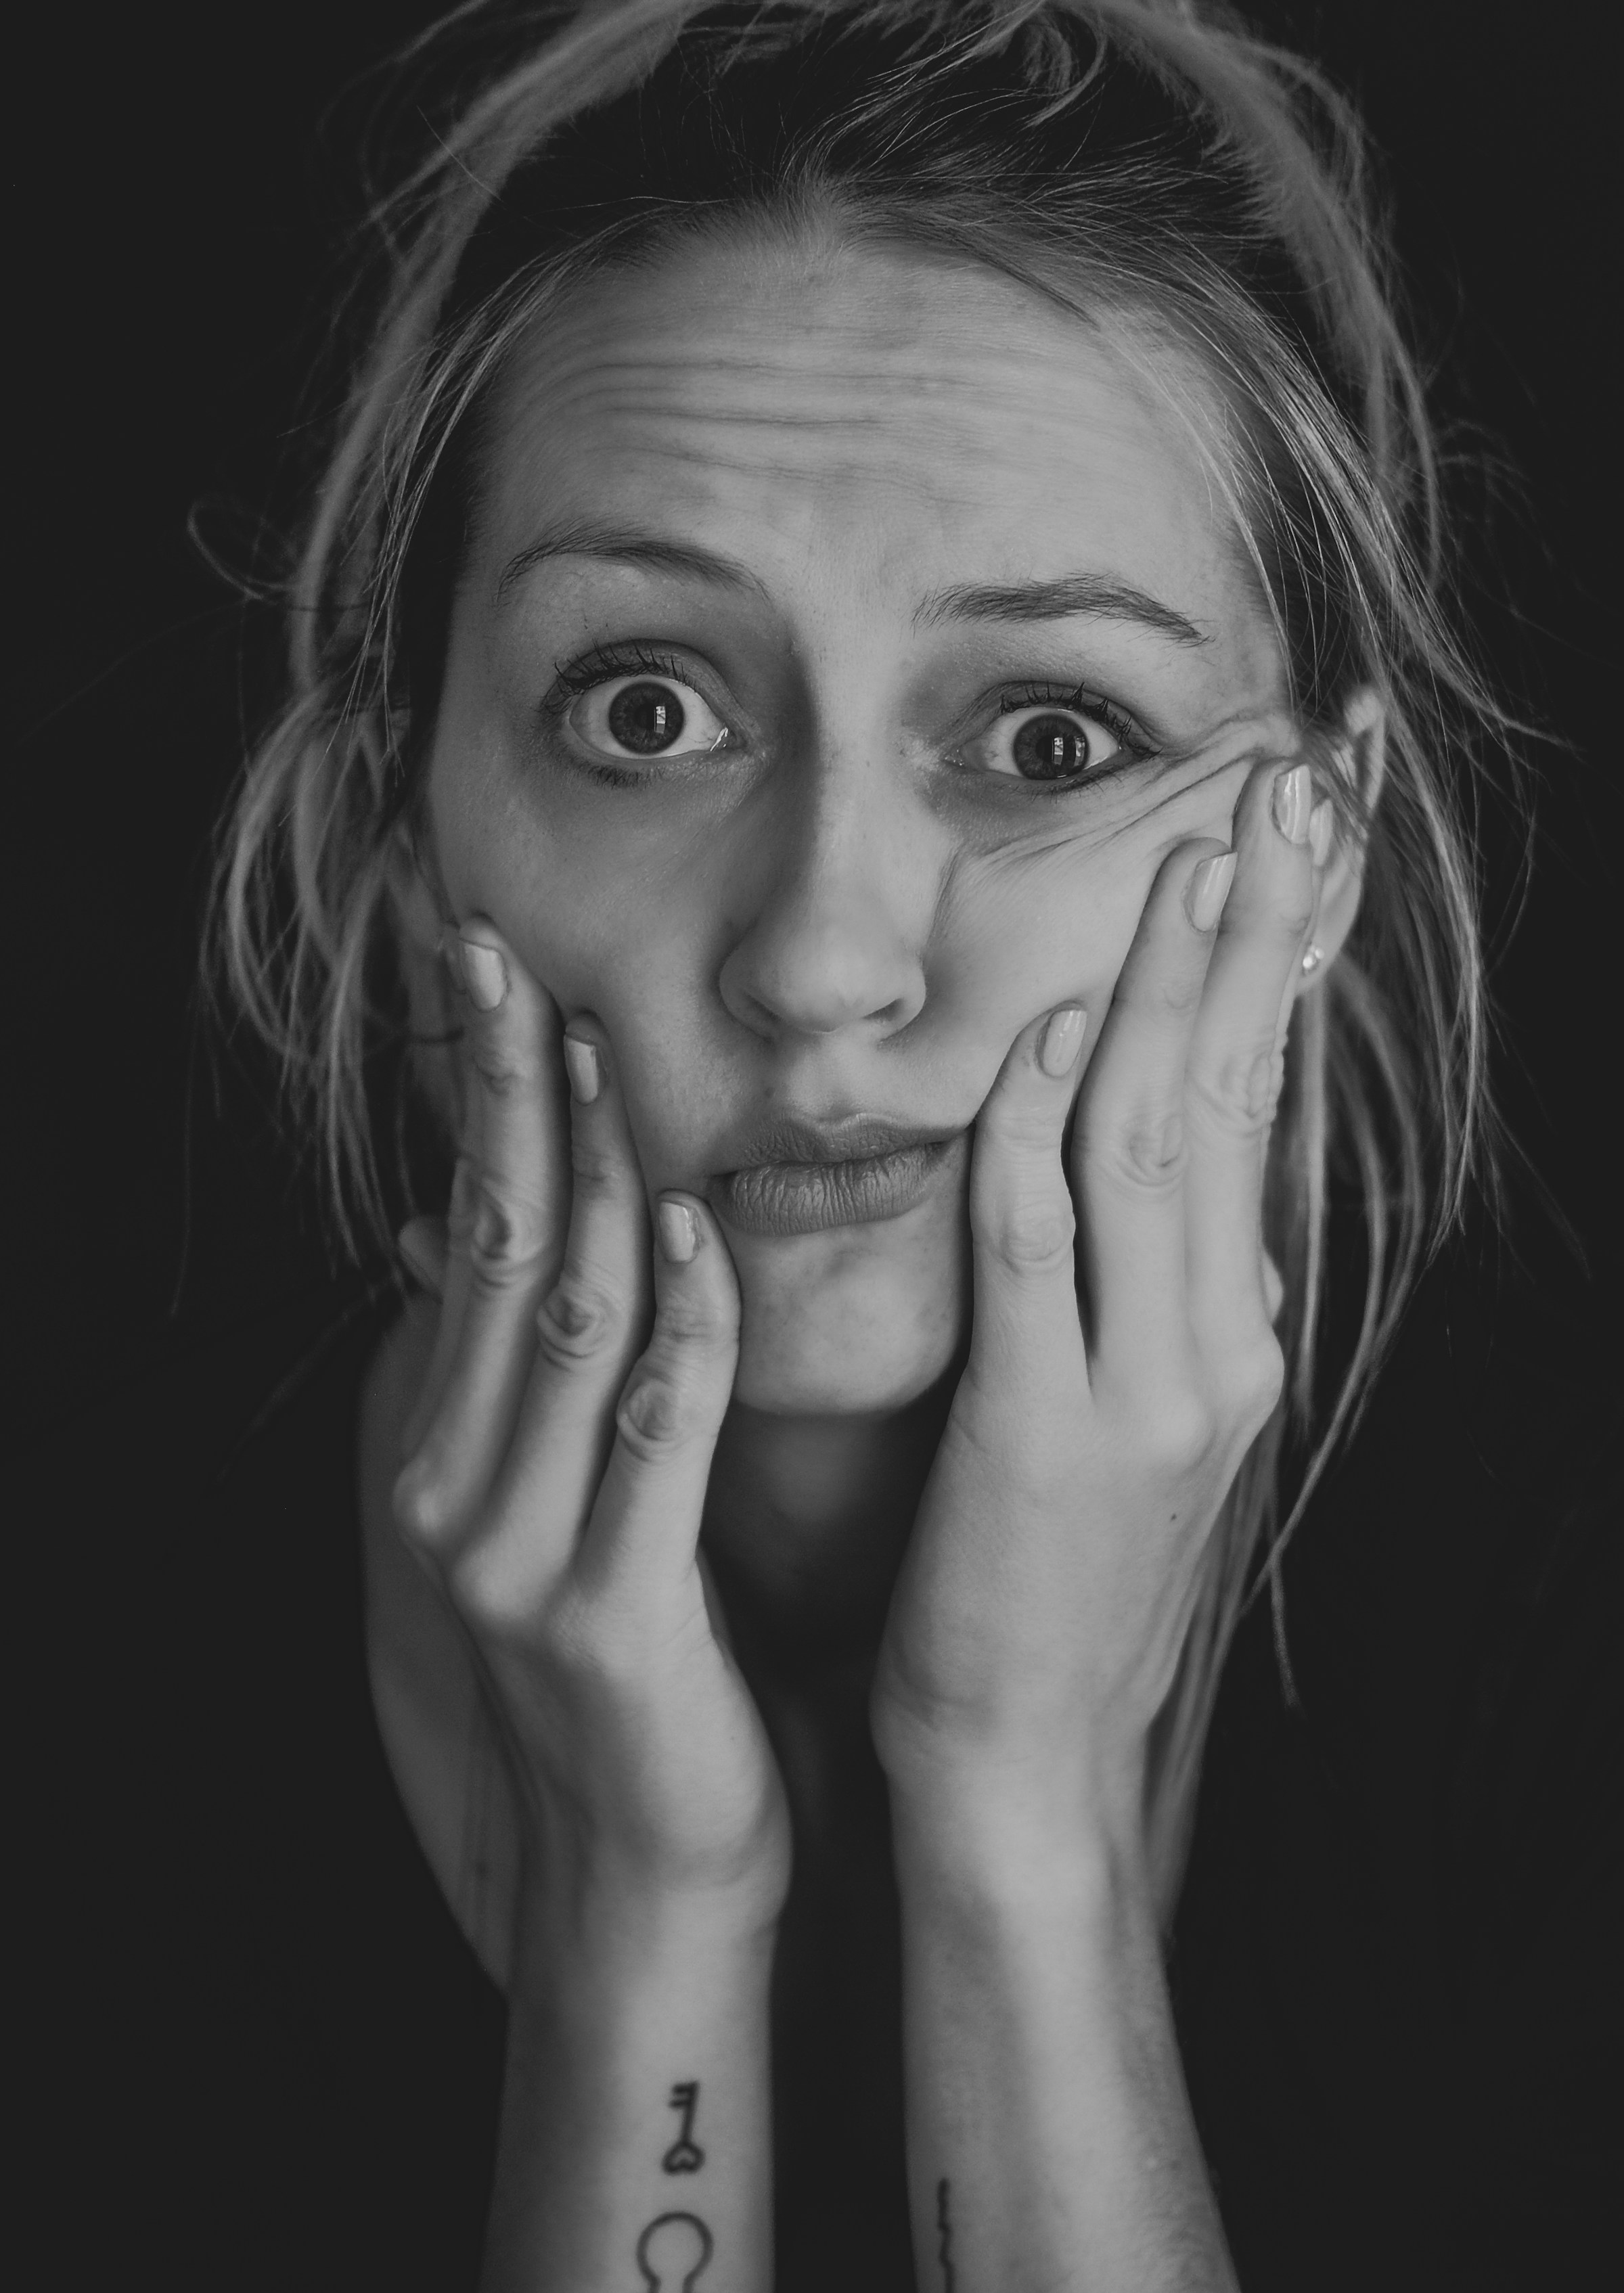 A shocked woman holding her face | Source: Unsplash